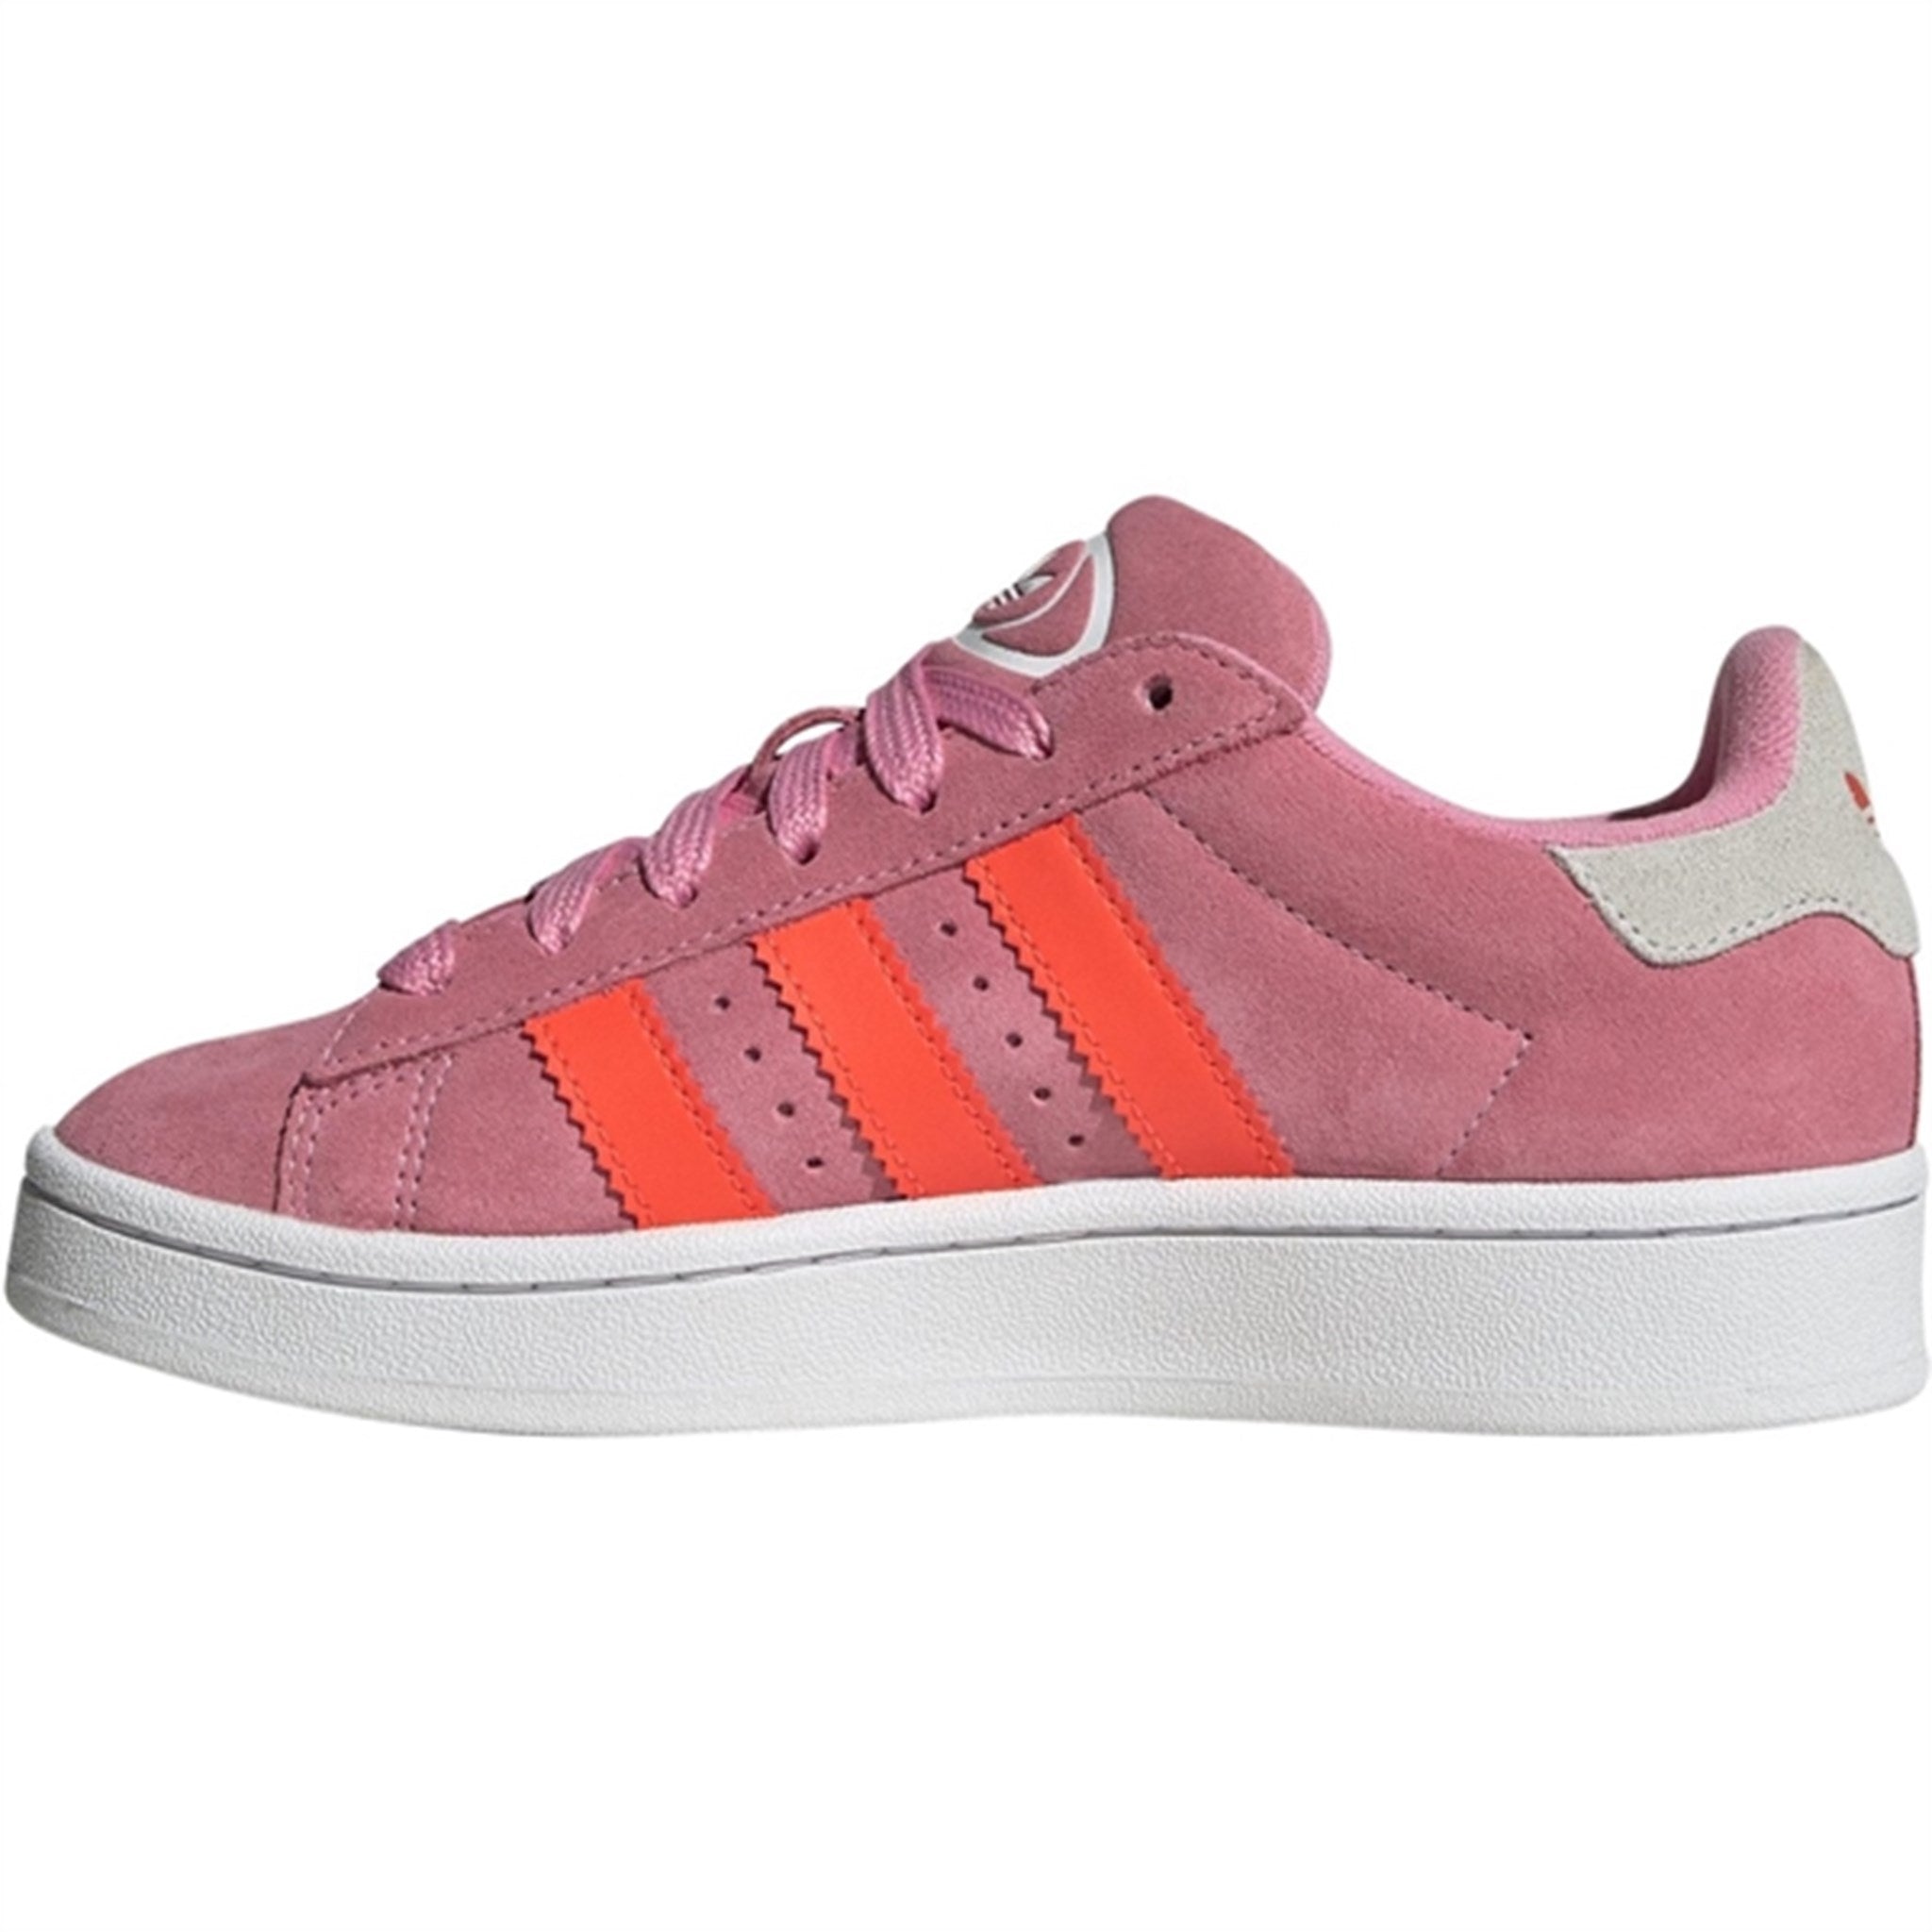 adidas Originals CAMPUS 00s J Sneakers Bliss Pink / Solar Red / Cloud White 9